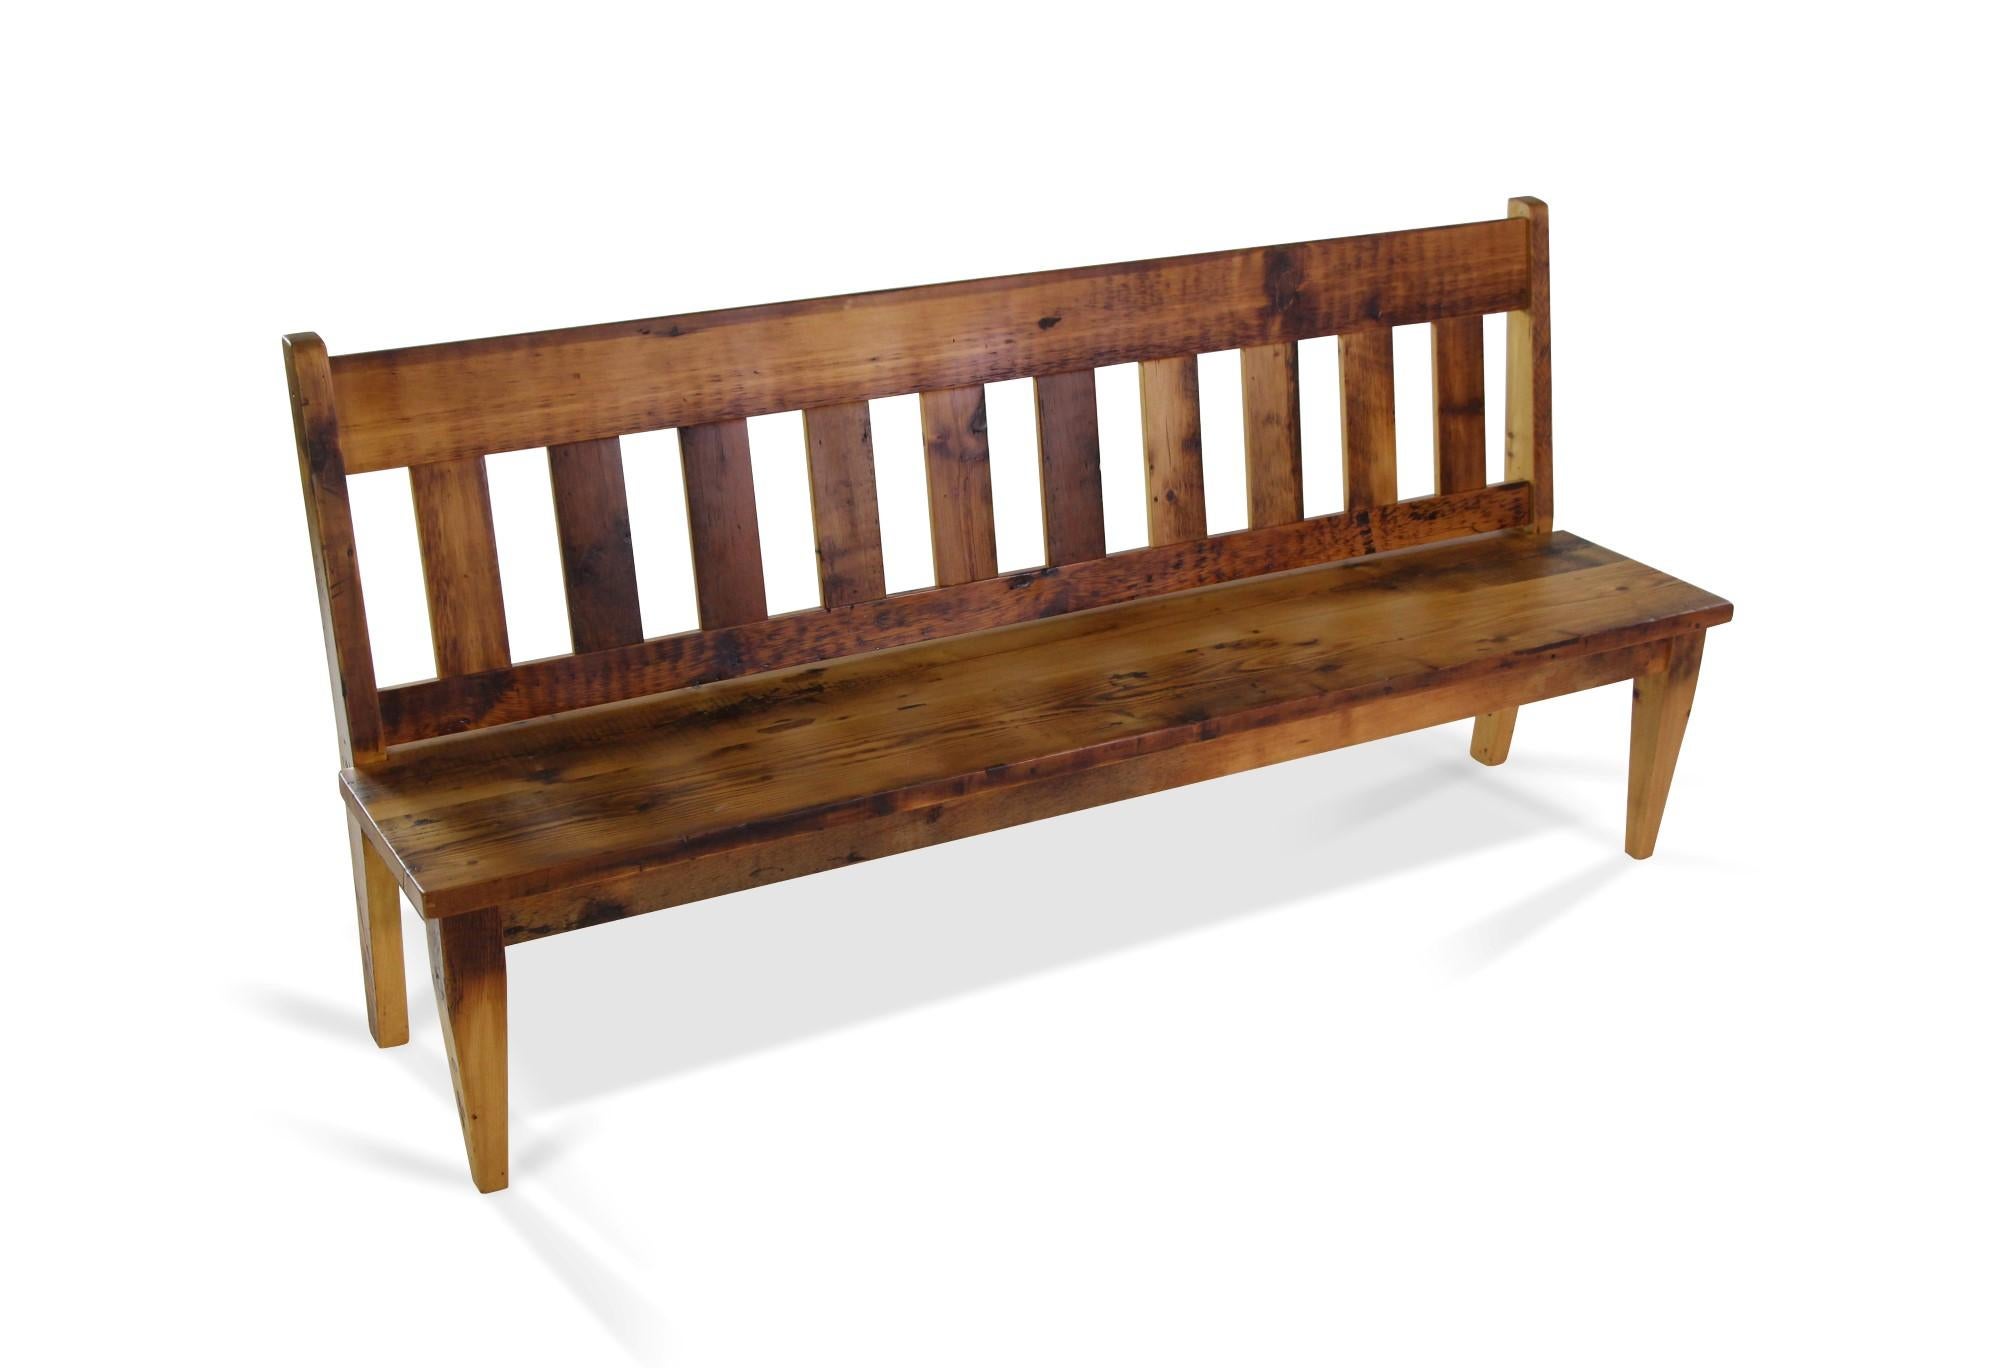 American 7 Ft Slatted Wood Bench with Reclaimed Pine Beams and Natural Stain